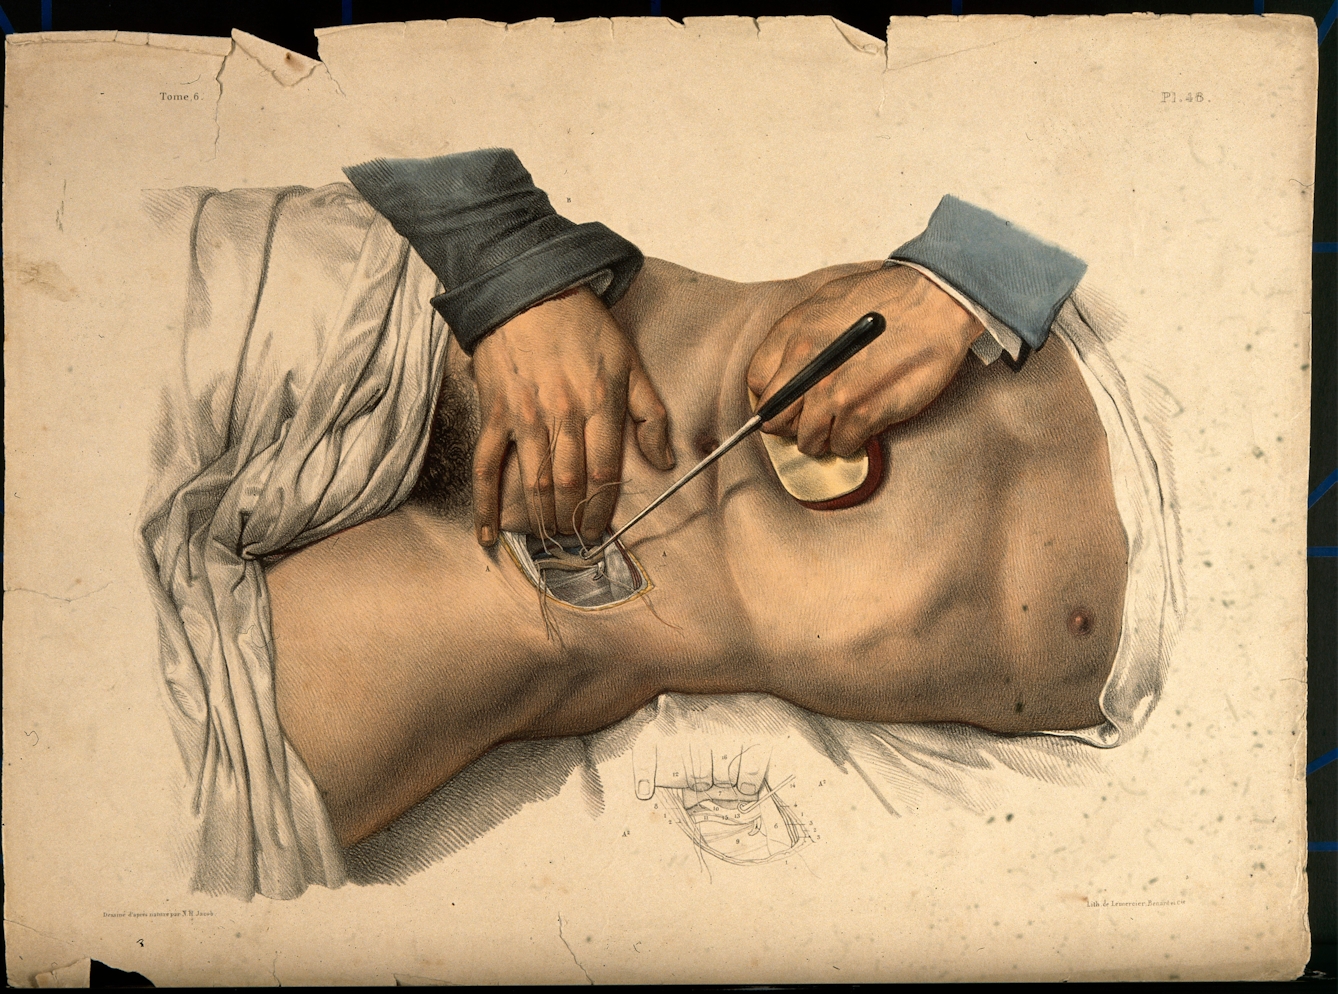 Coloured lithograph showing an operation being performed on the lower abdomen of a male patient.